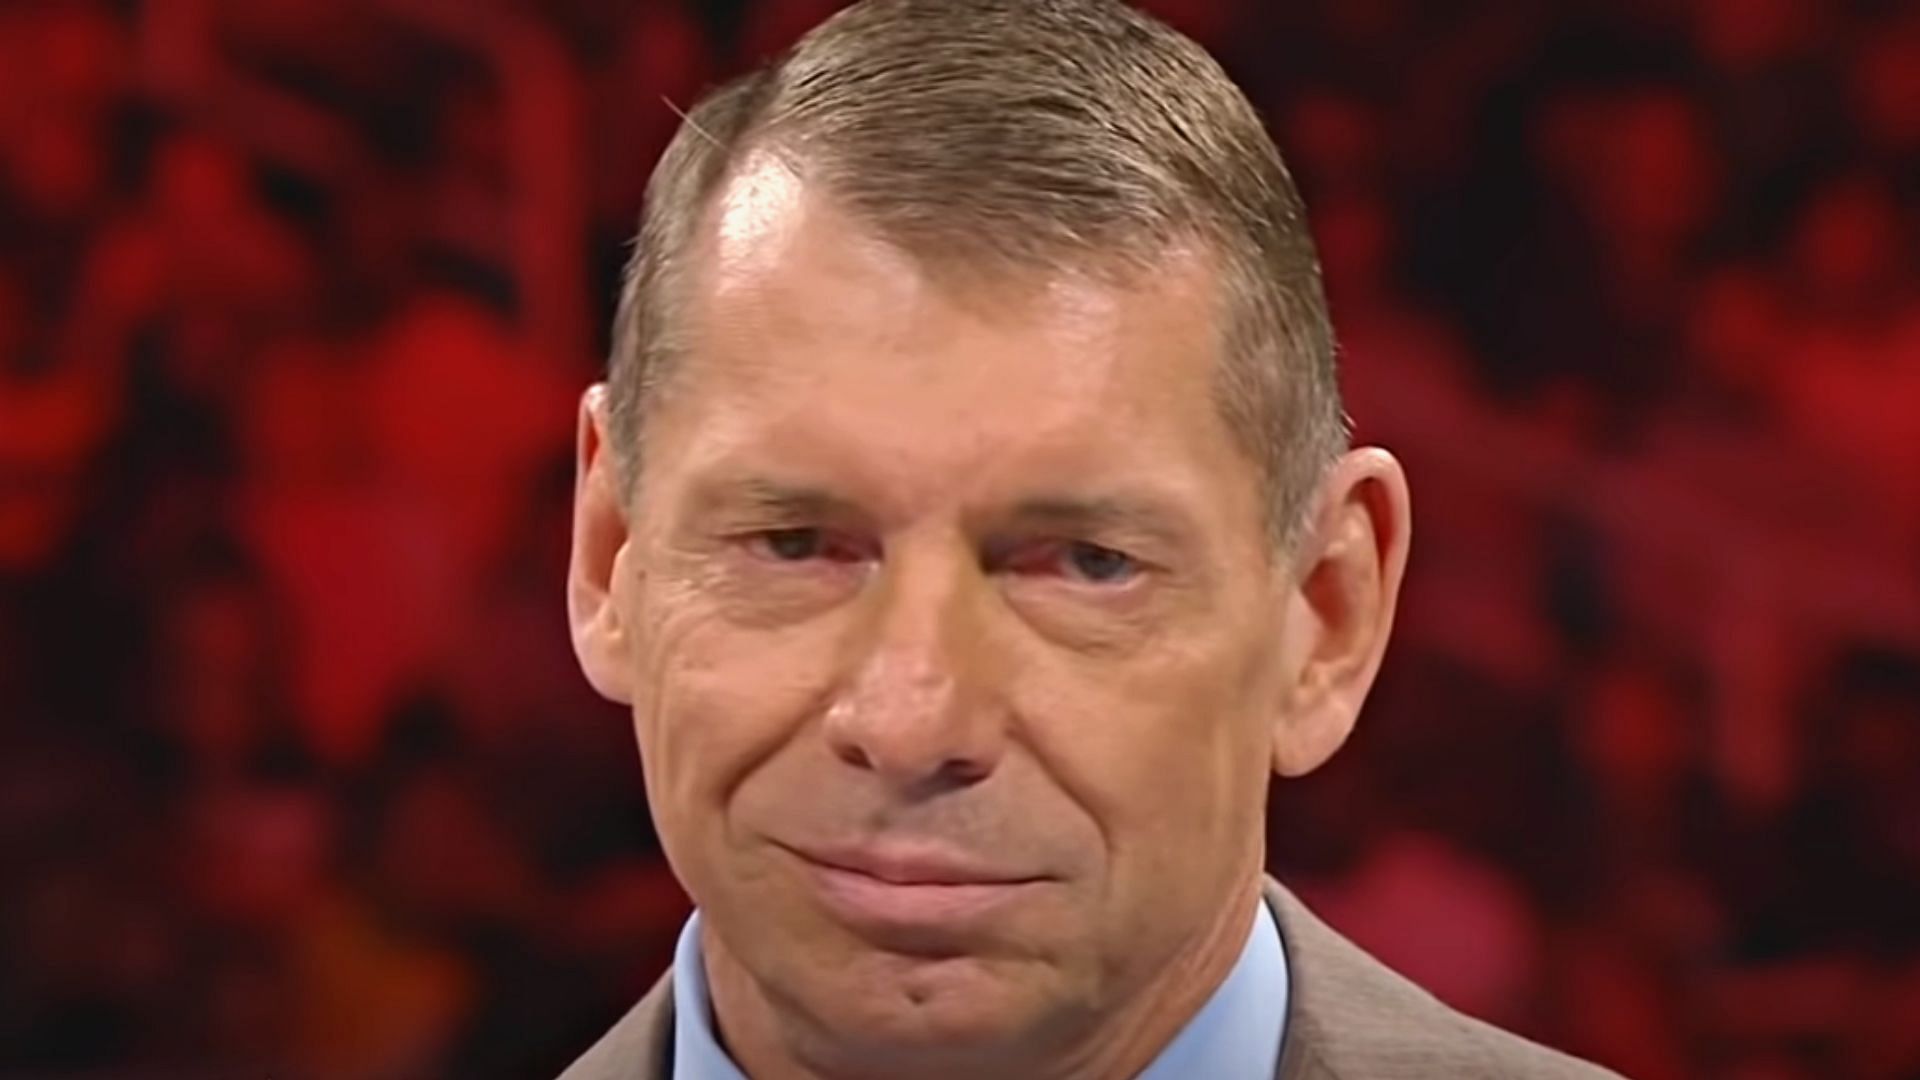 The budget cuts continue to happen regularly in Vince McMahon&#039;s company.